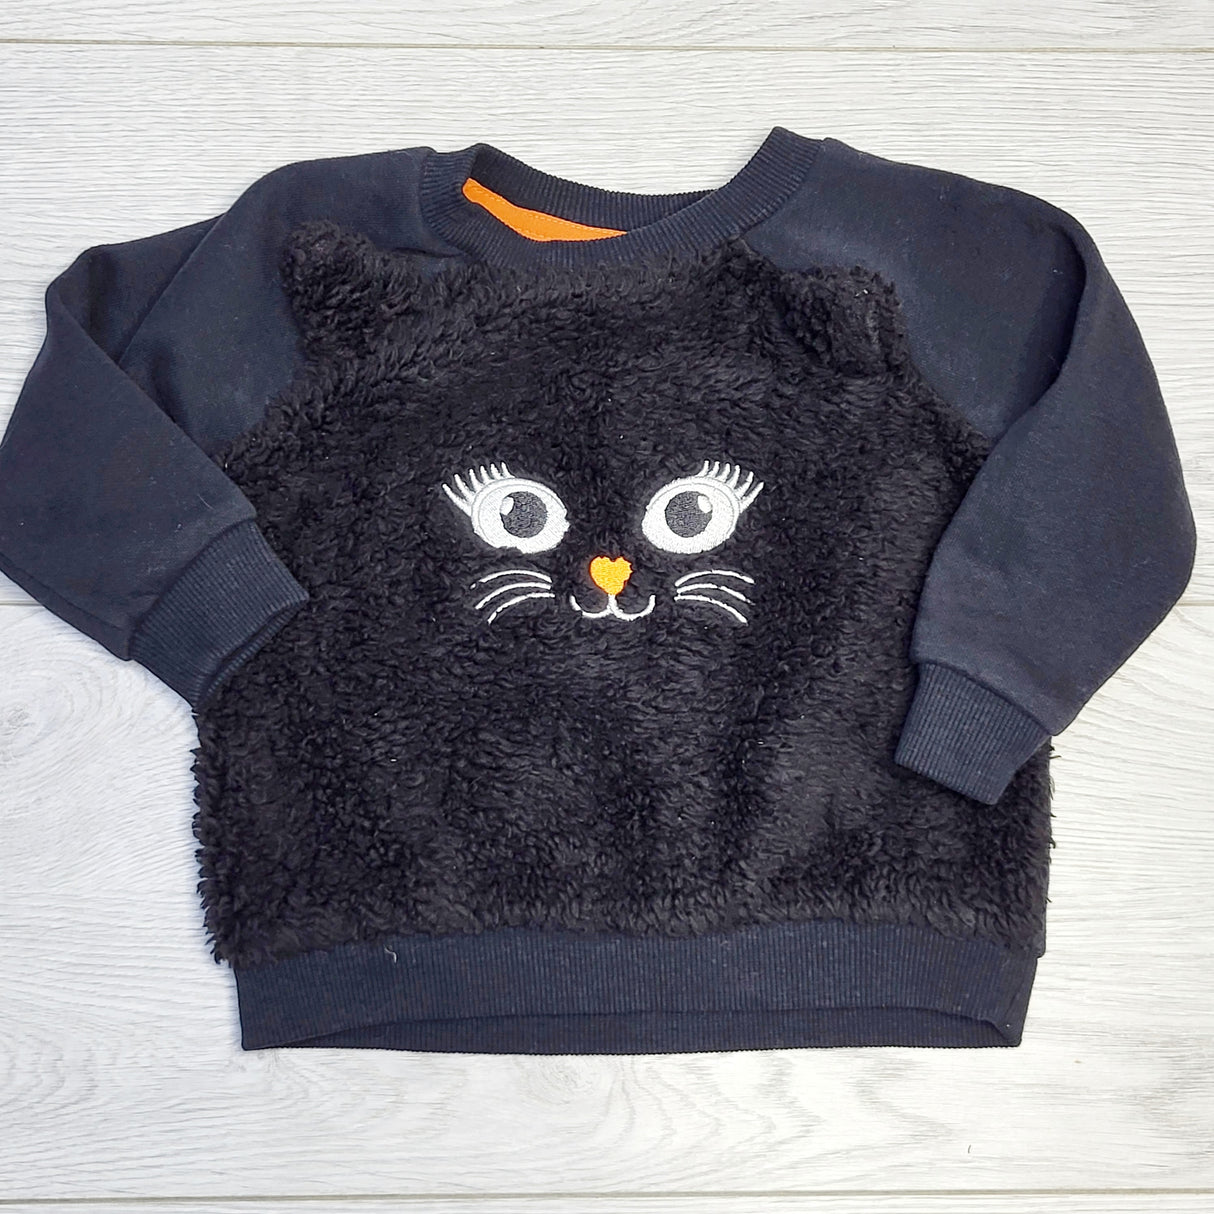 RZA1 - George black faux fur sweatshirt with cat, size 6-12 months